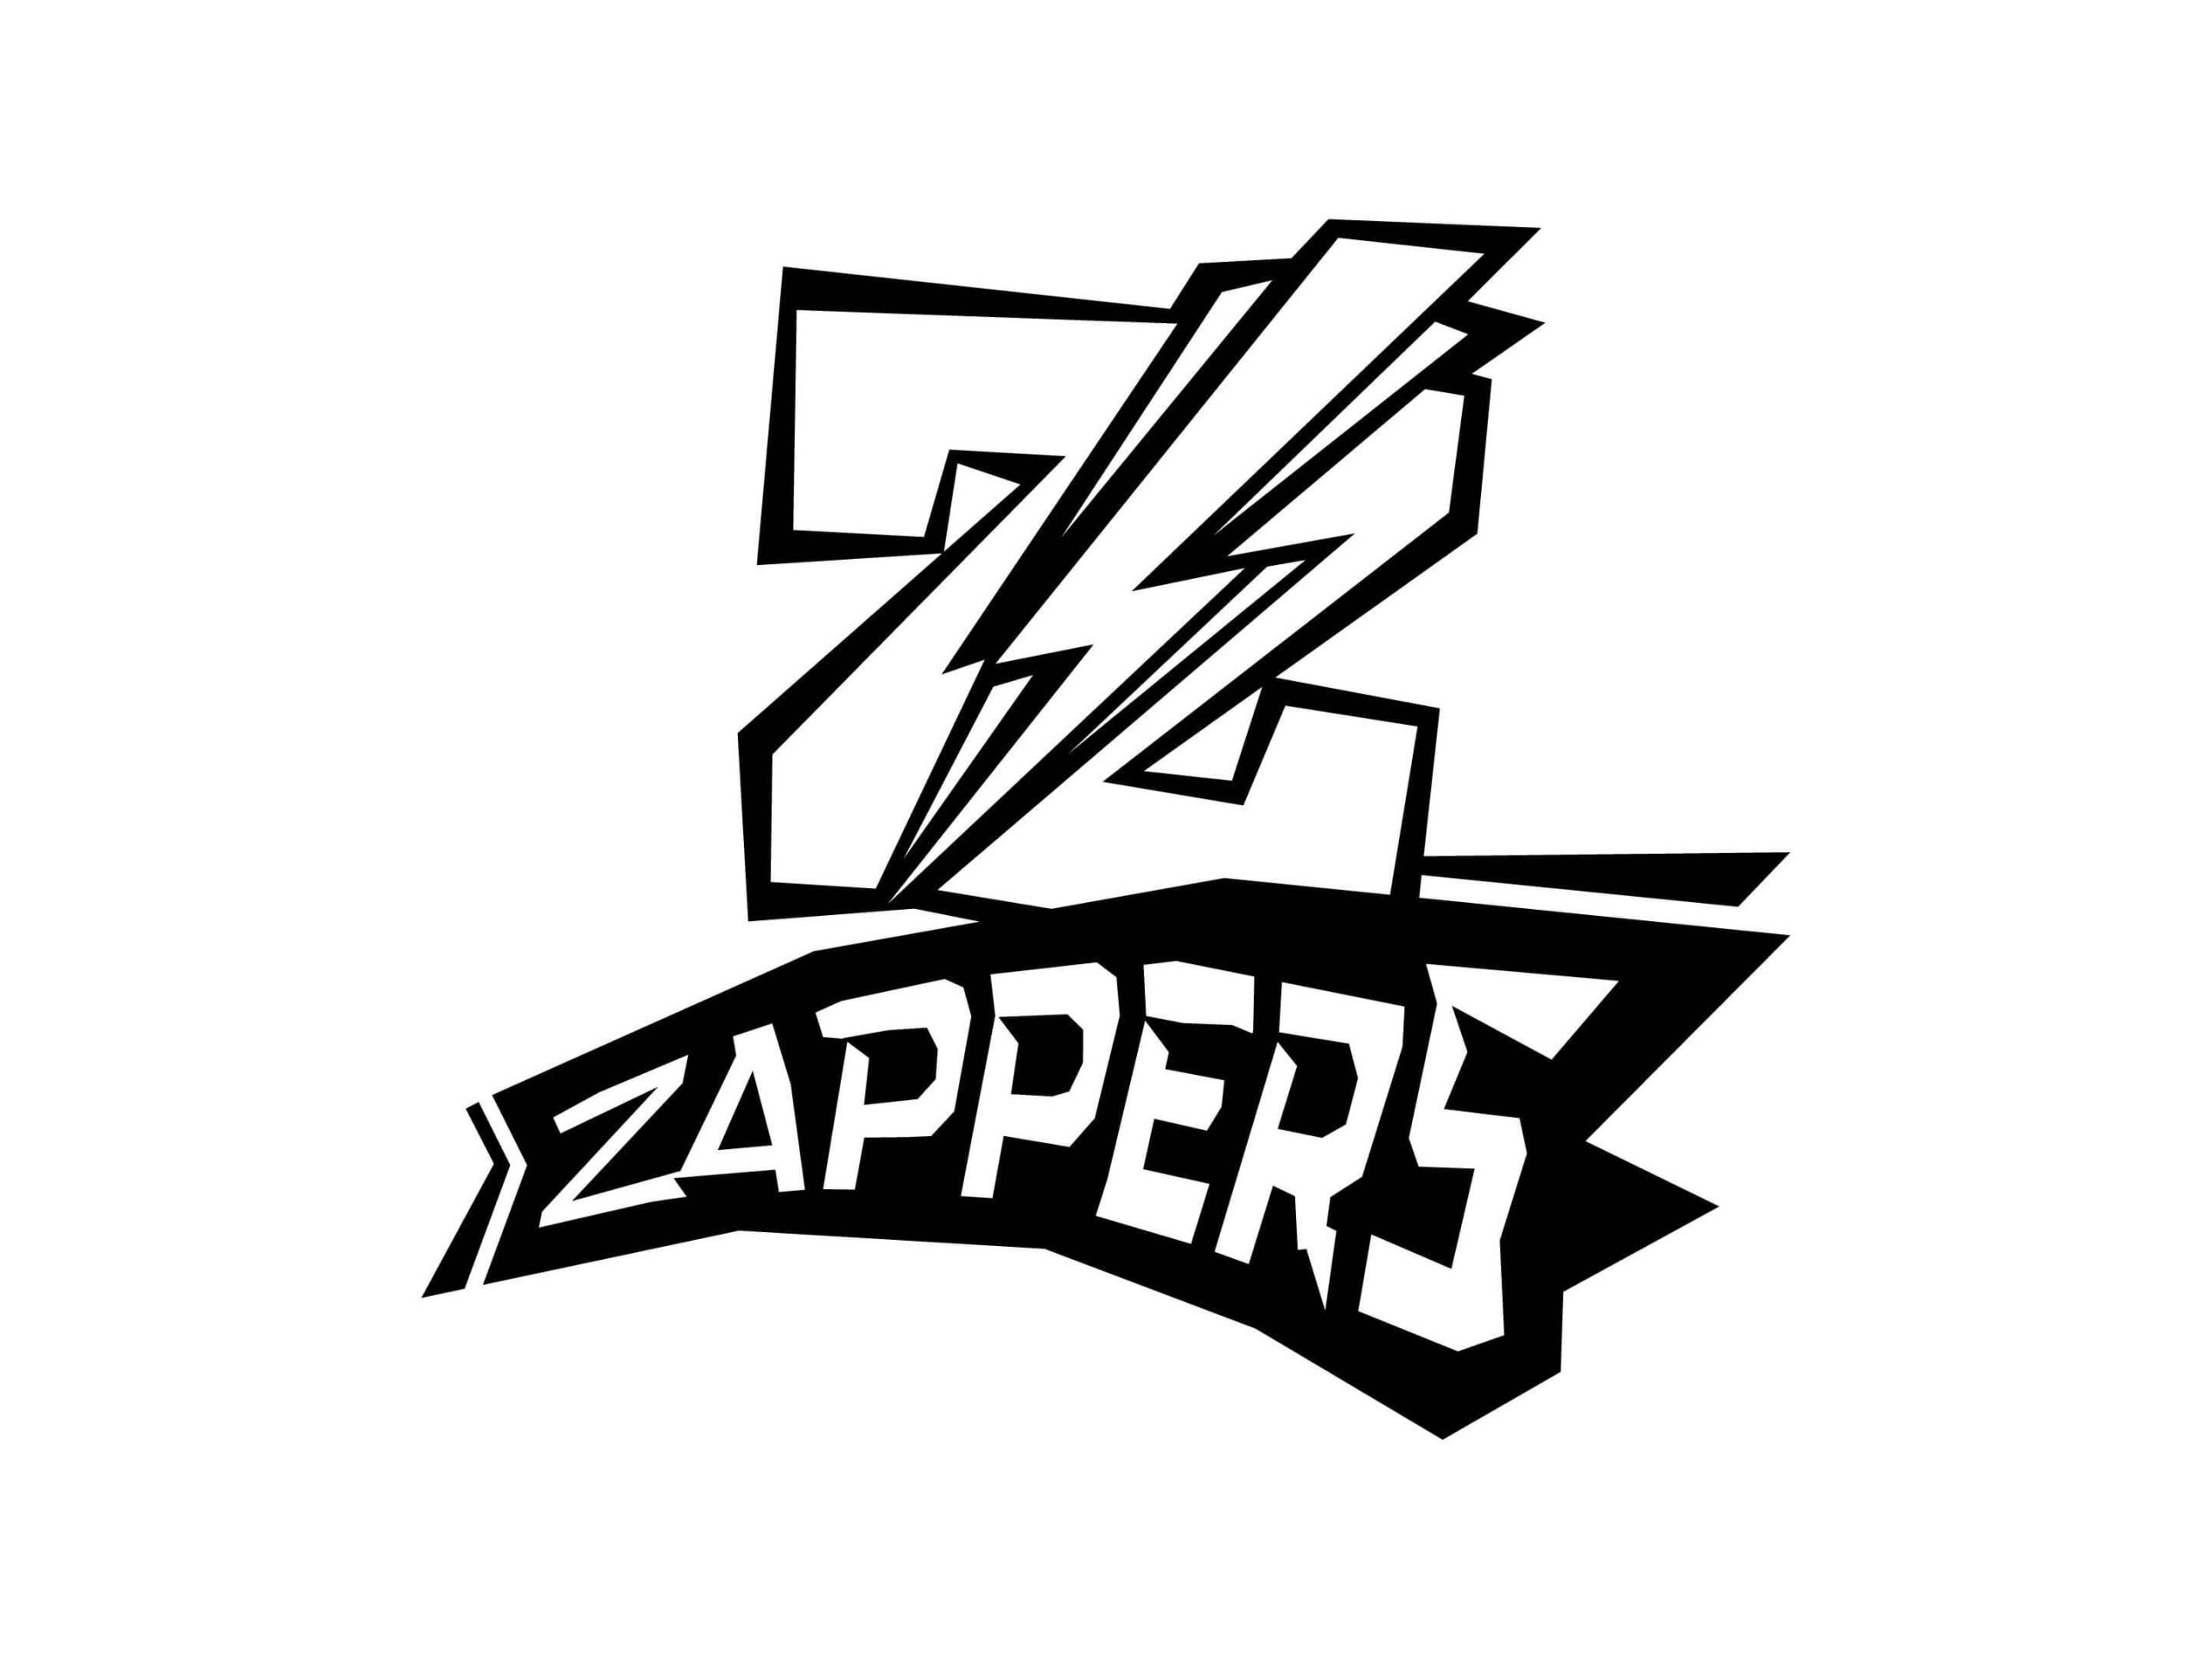 The Zappers